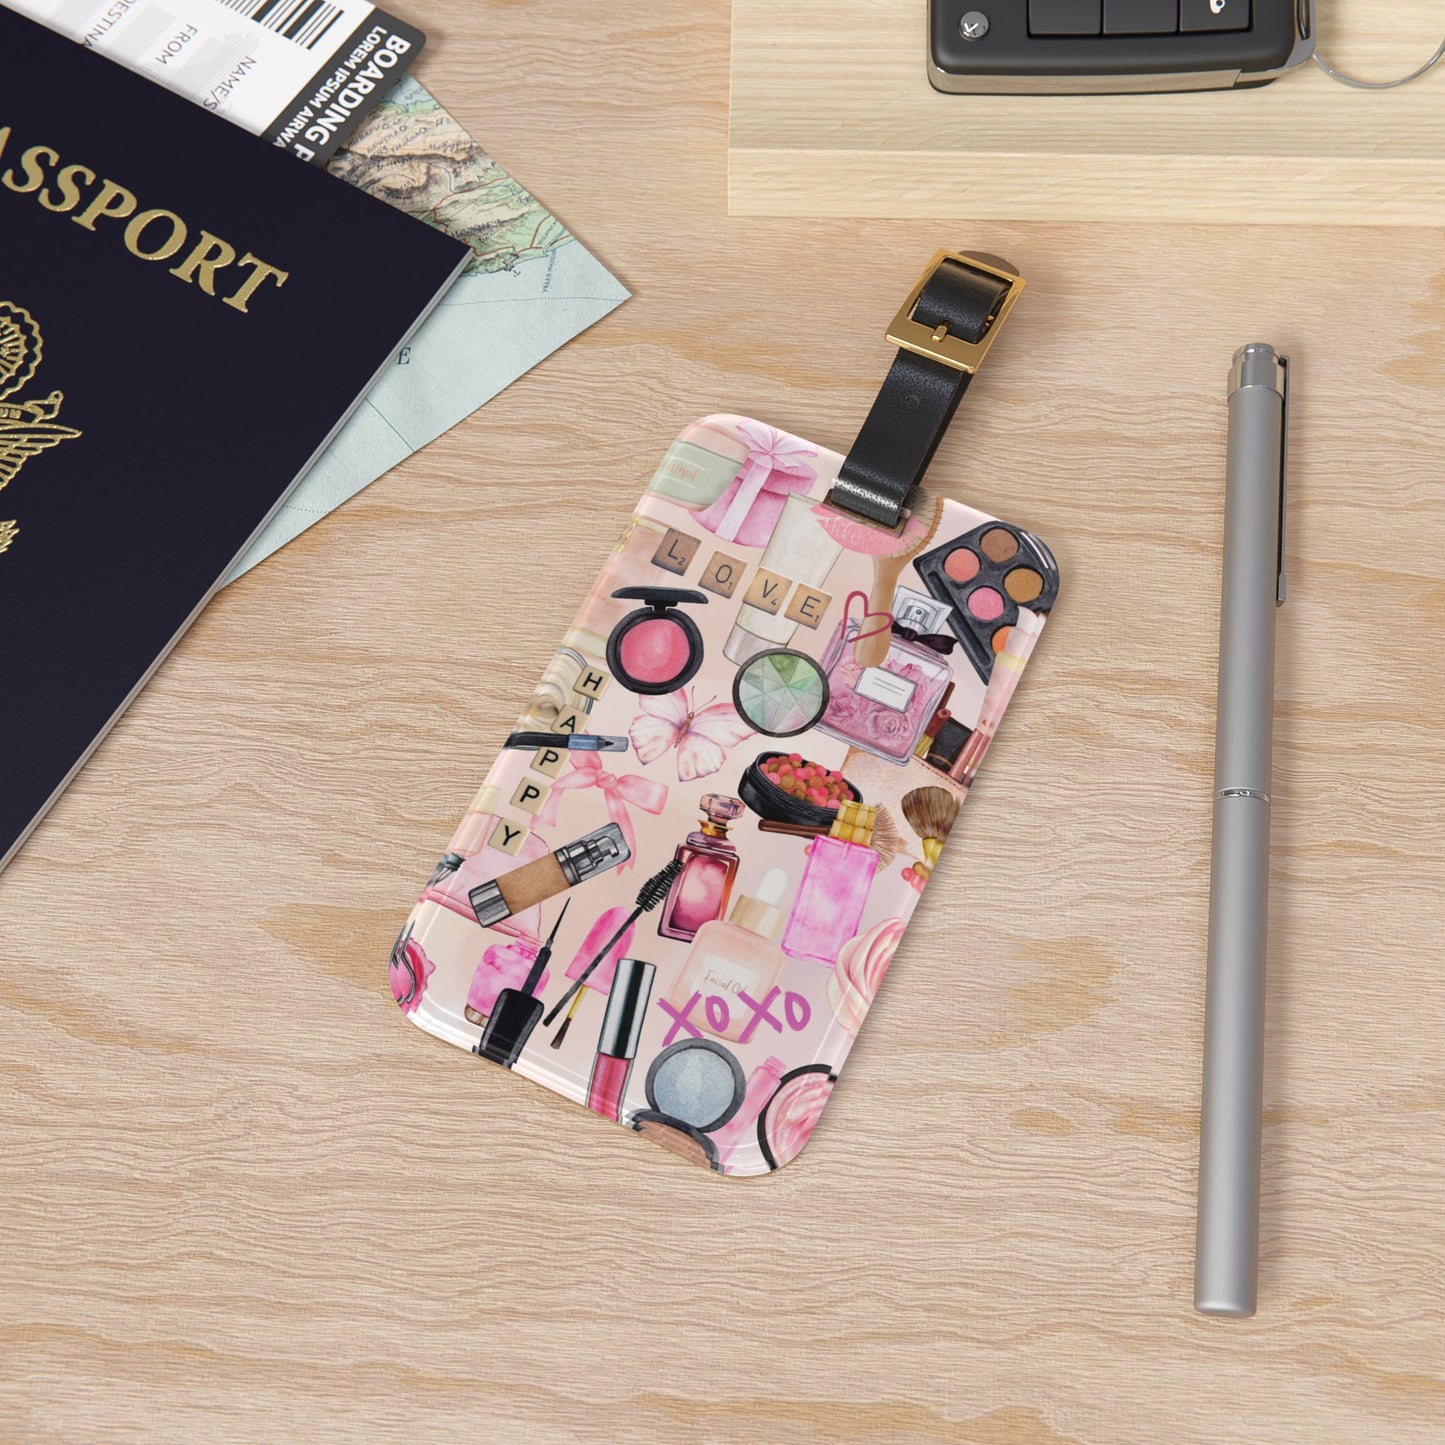 Beauty Supplies & Makeup Collage Art Luggage Tag